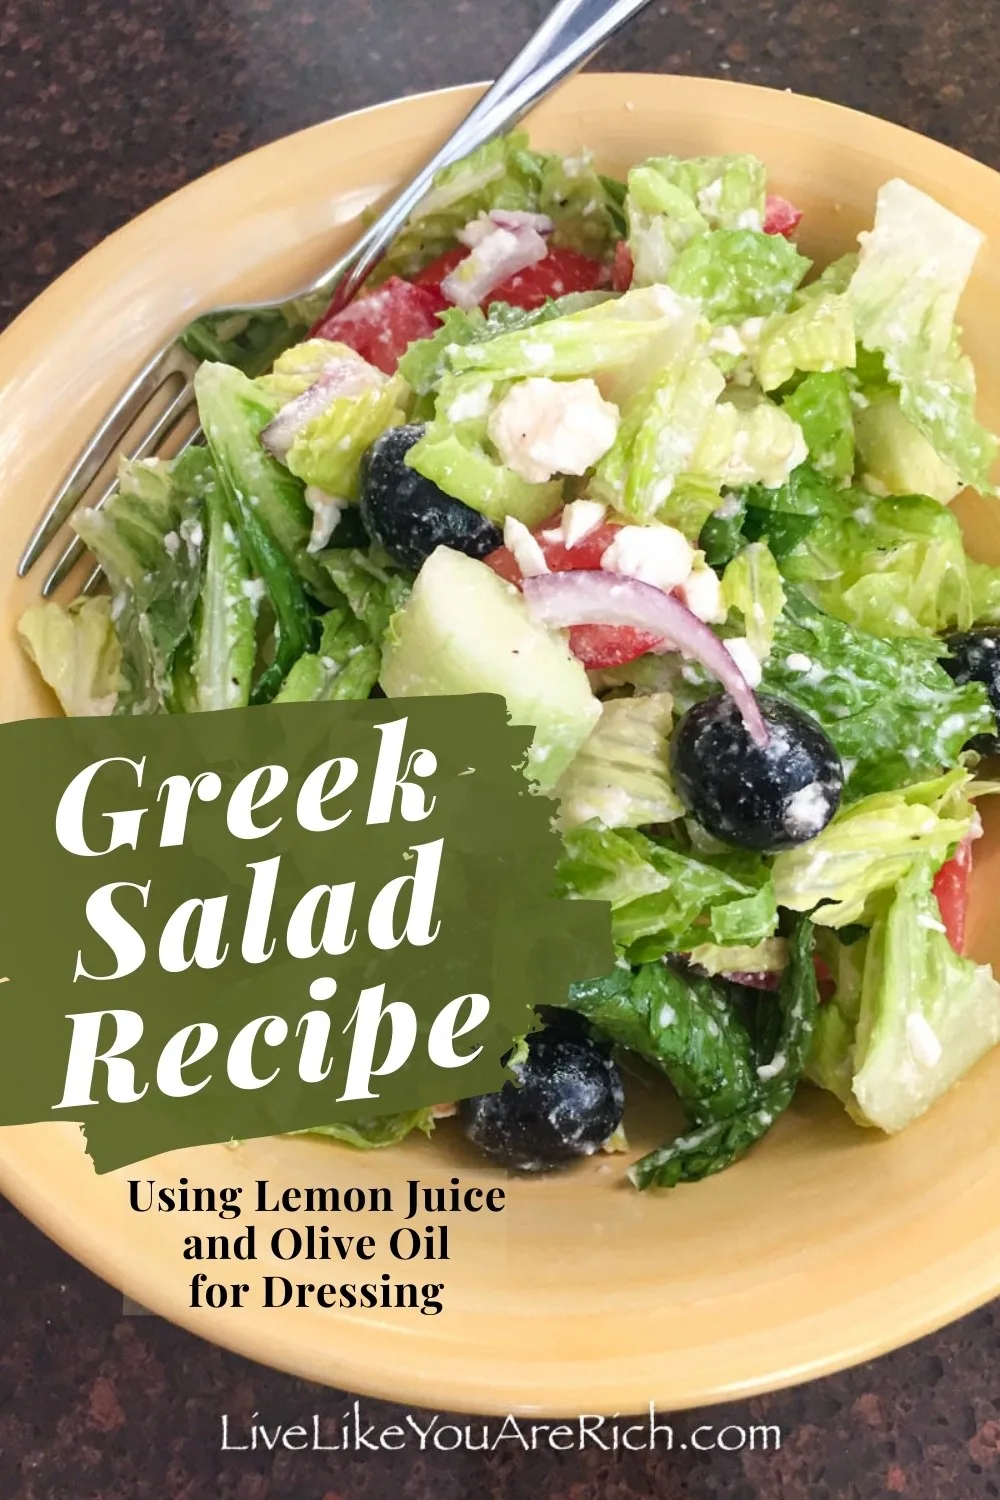 This Greek Salad Recipe using just lemon juice and olive oil for dressing is amazingly refreshing and delicious. It has got a great blend of flavors, tastes super fresh and is easy to make.